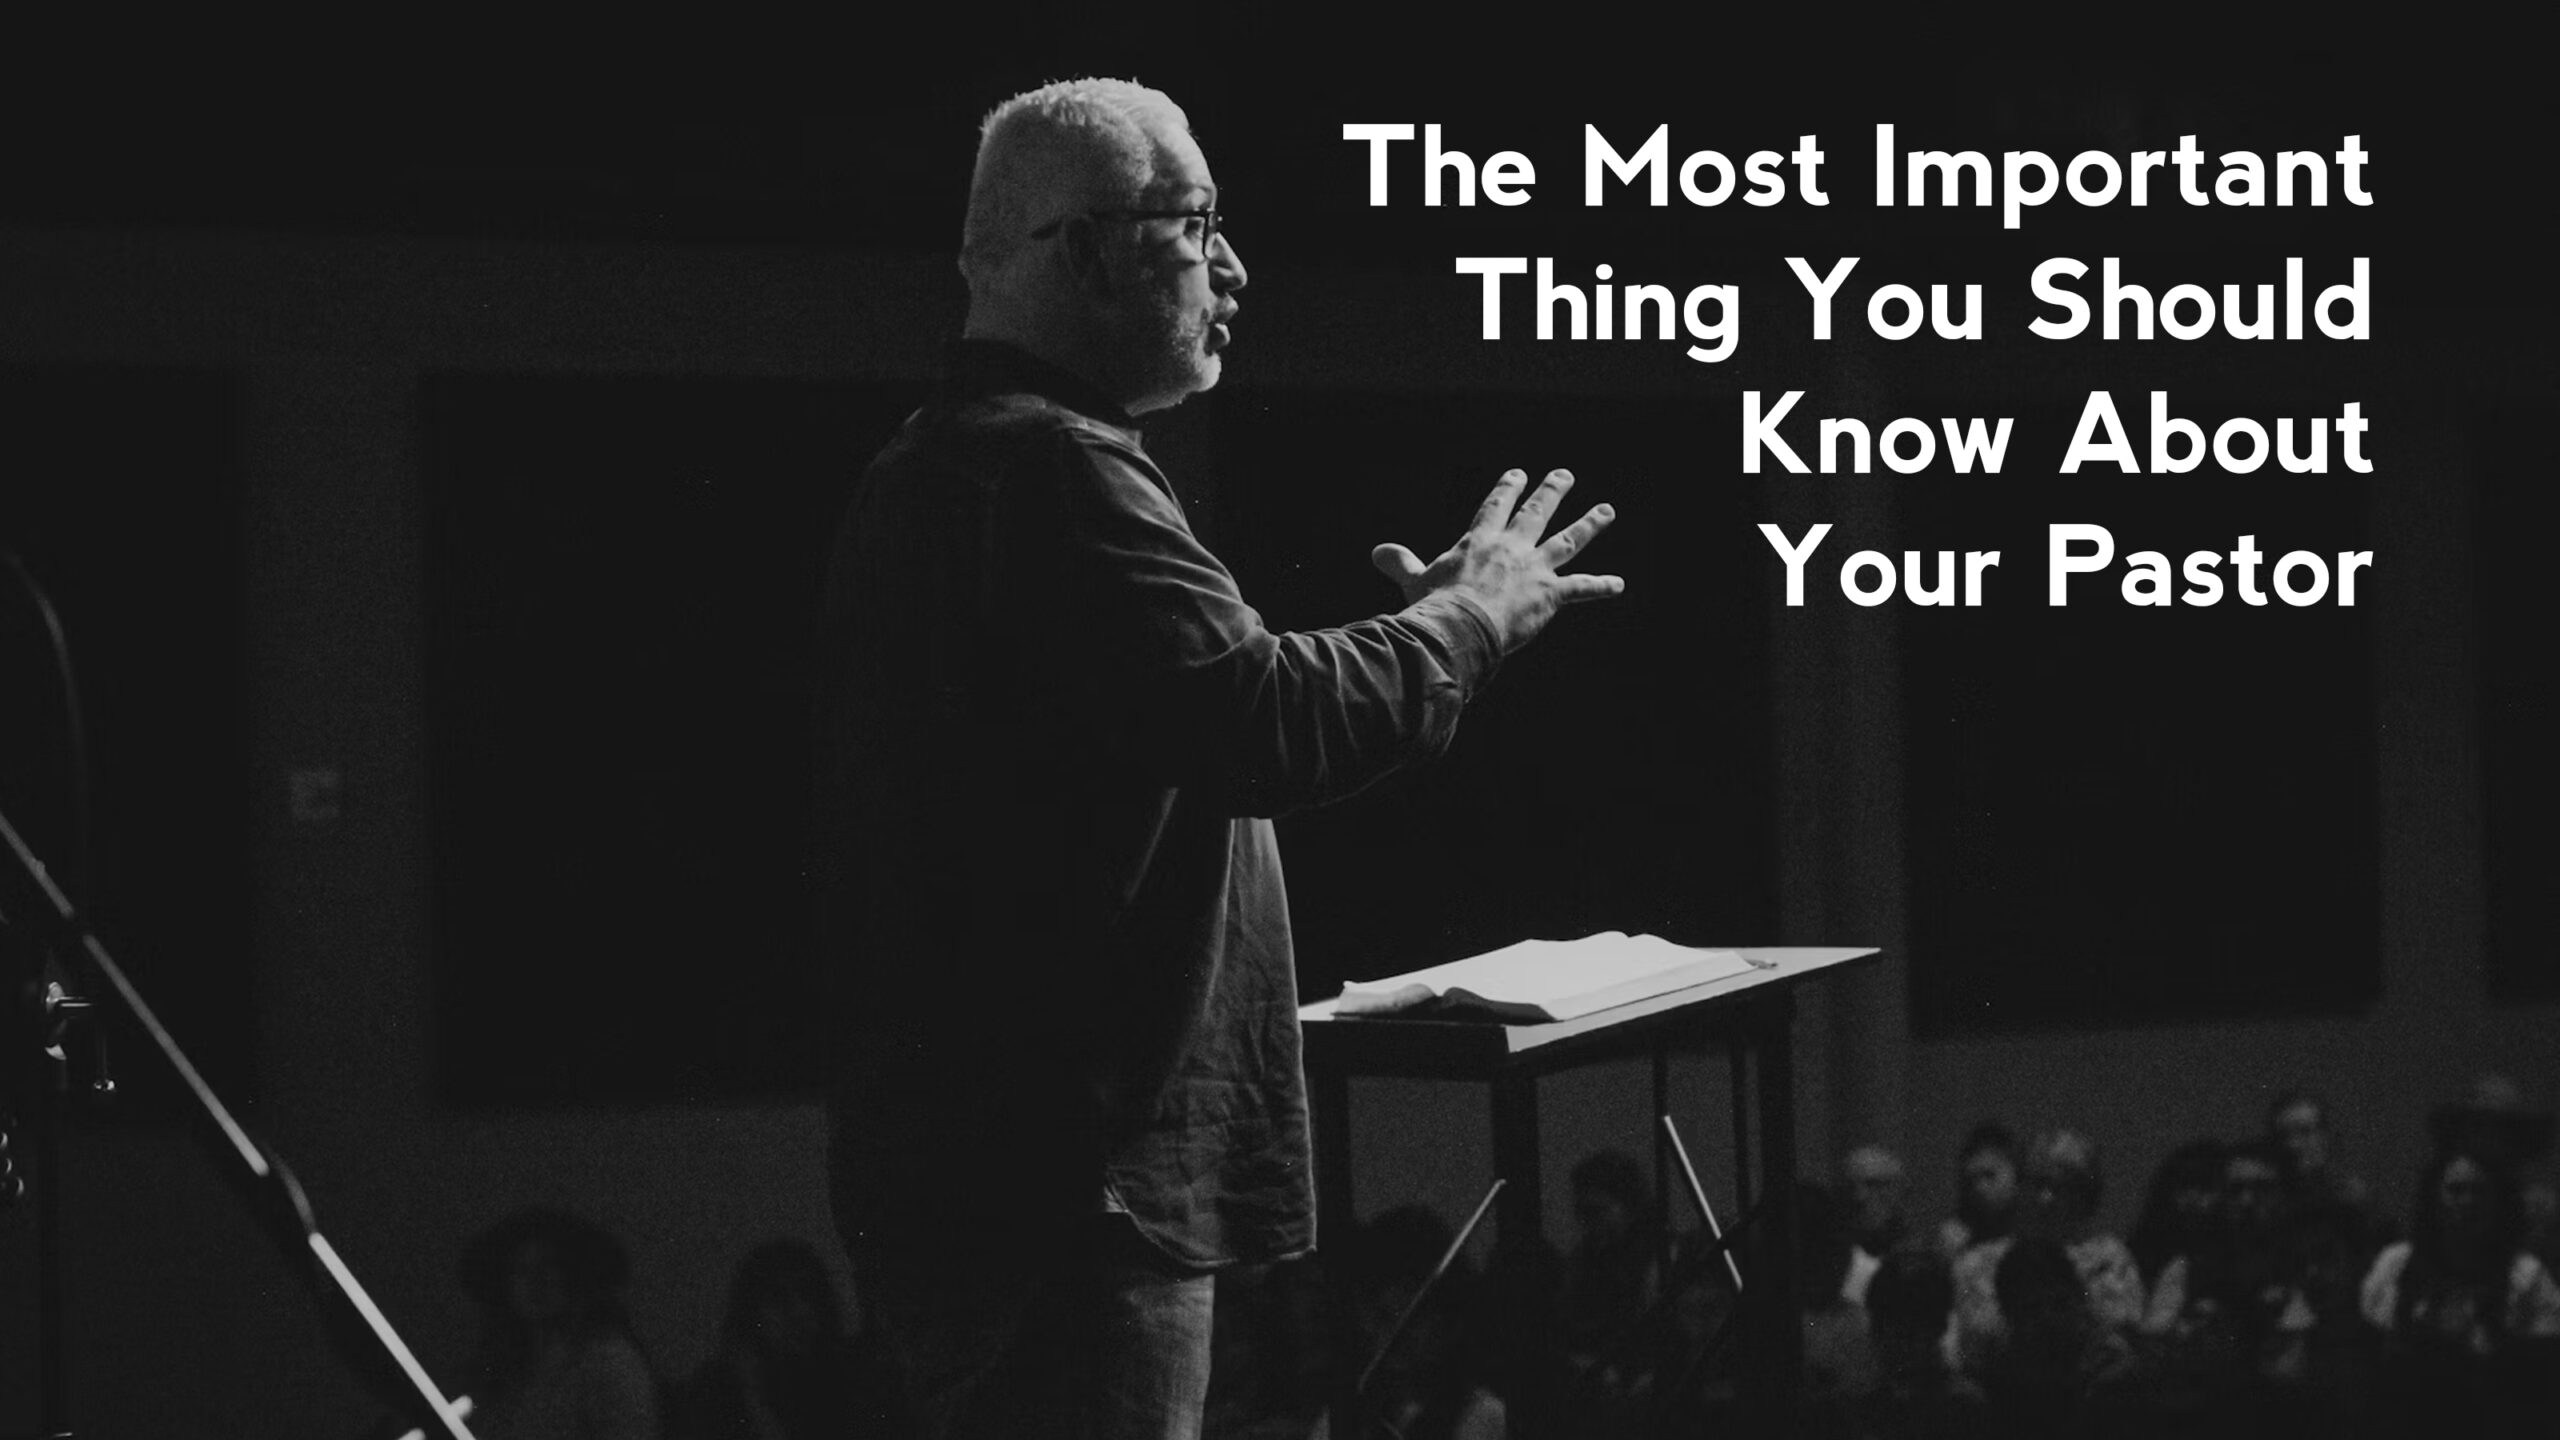 The Most Important Thing You Should Know About Your Pastor